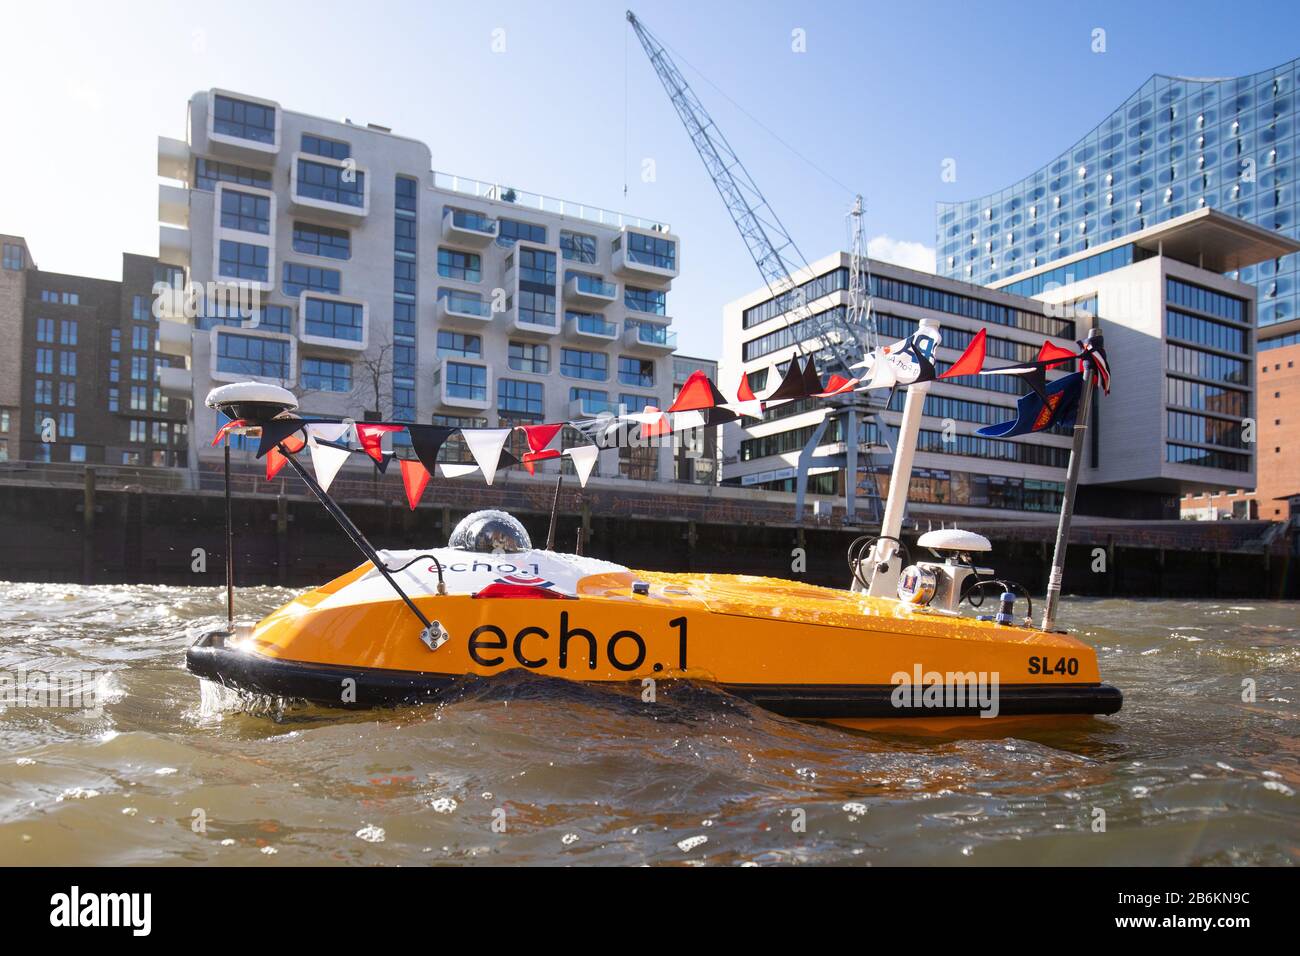 Hamburg, Germany. 11th Mar, 2020. The first autonomous drone for surveying waters, 'echo.1', is on its way in front of the Elbphilharmonie (r) in Hafencity after a naming ceremony in Sandtorhafen harbour. The so-called Autonomous Surface Vehicle (ASV) with its electric drive can be on the road for up to six hours to further improve data on water depths in the Port of Hamburg. Credit: Christian Charisius/dpa/Alamy Live News Stock Photo